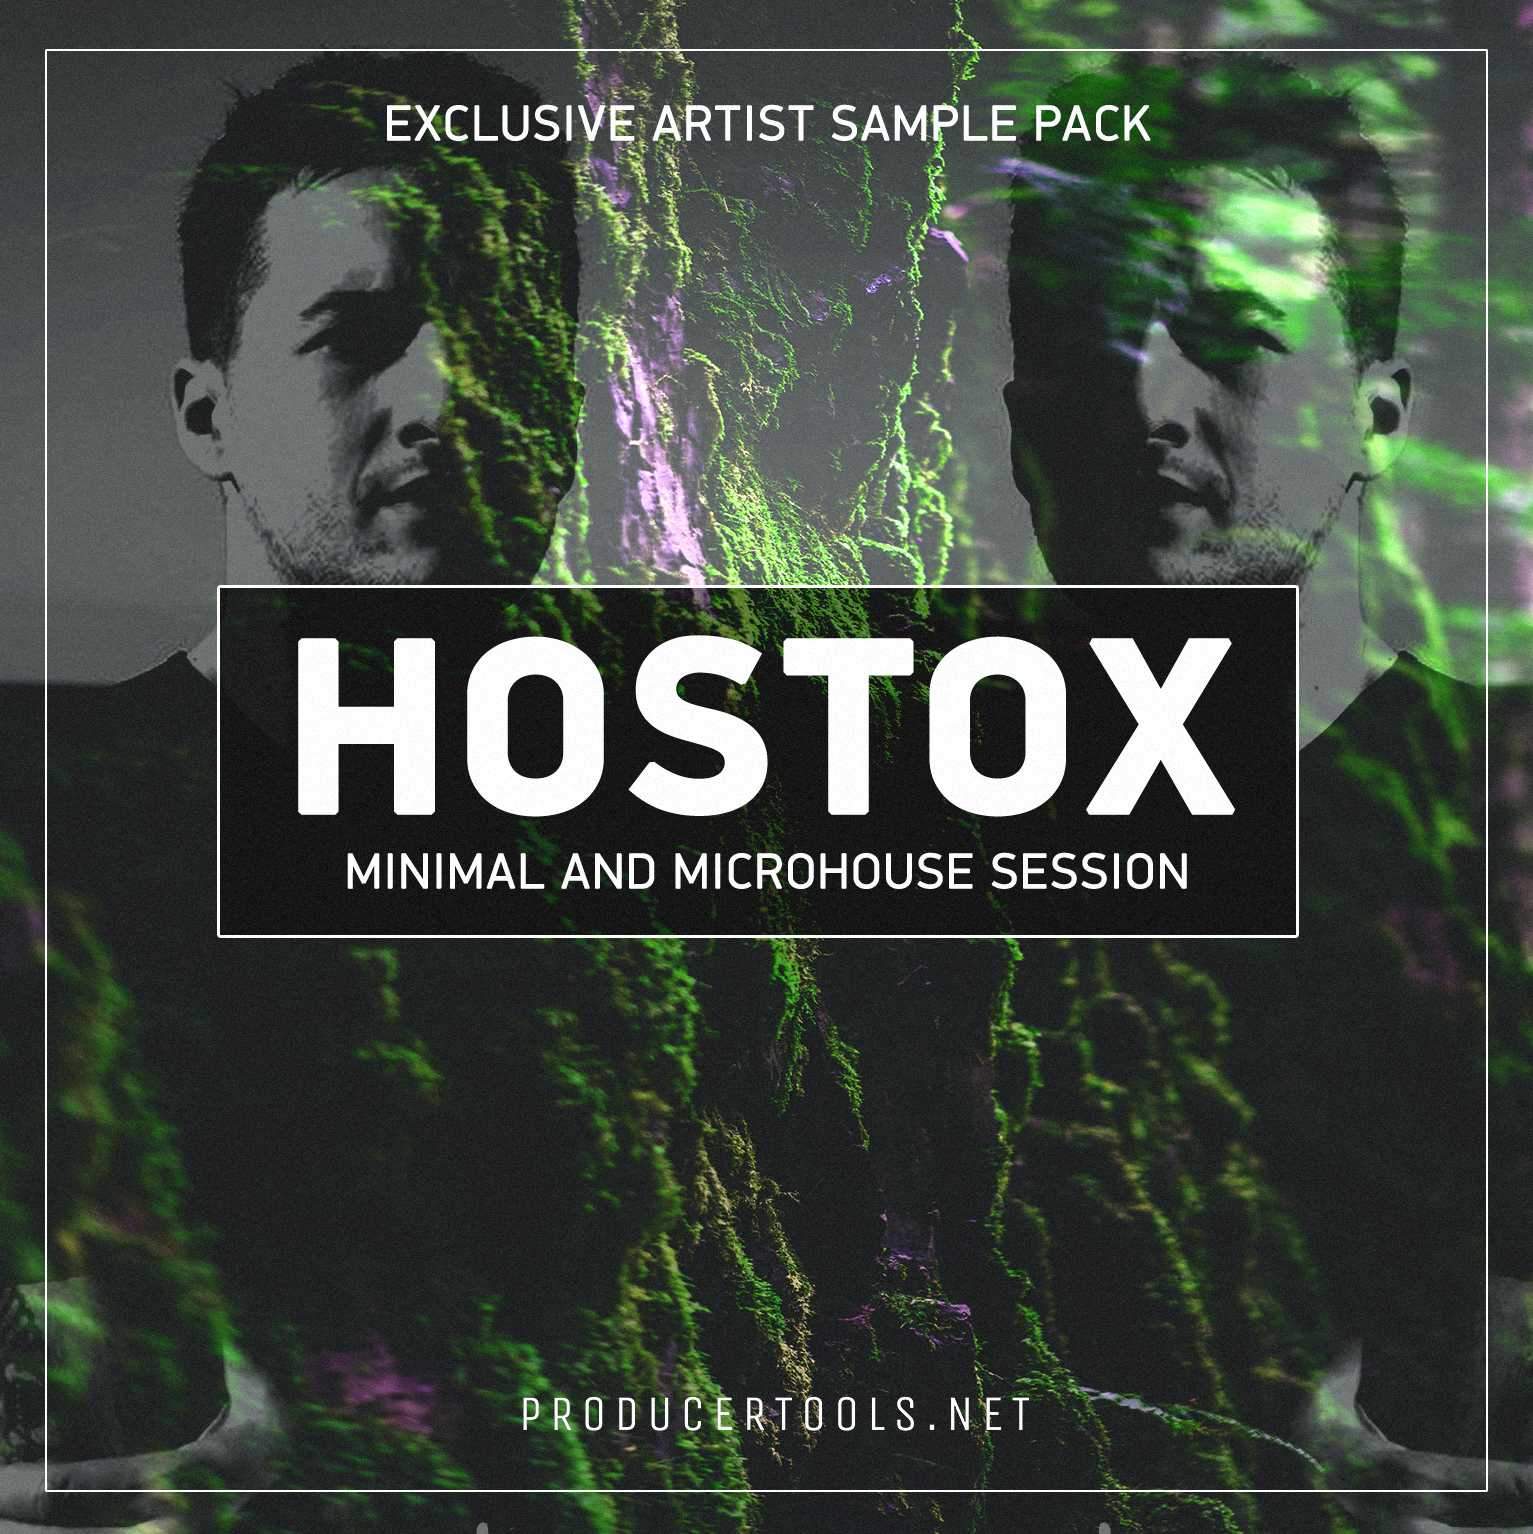 Exclusive Artist Pack by HOSTOX - Producer Tools